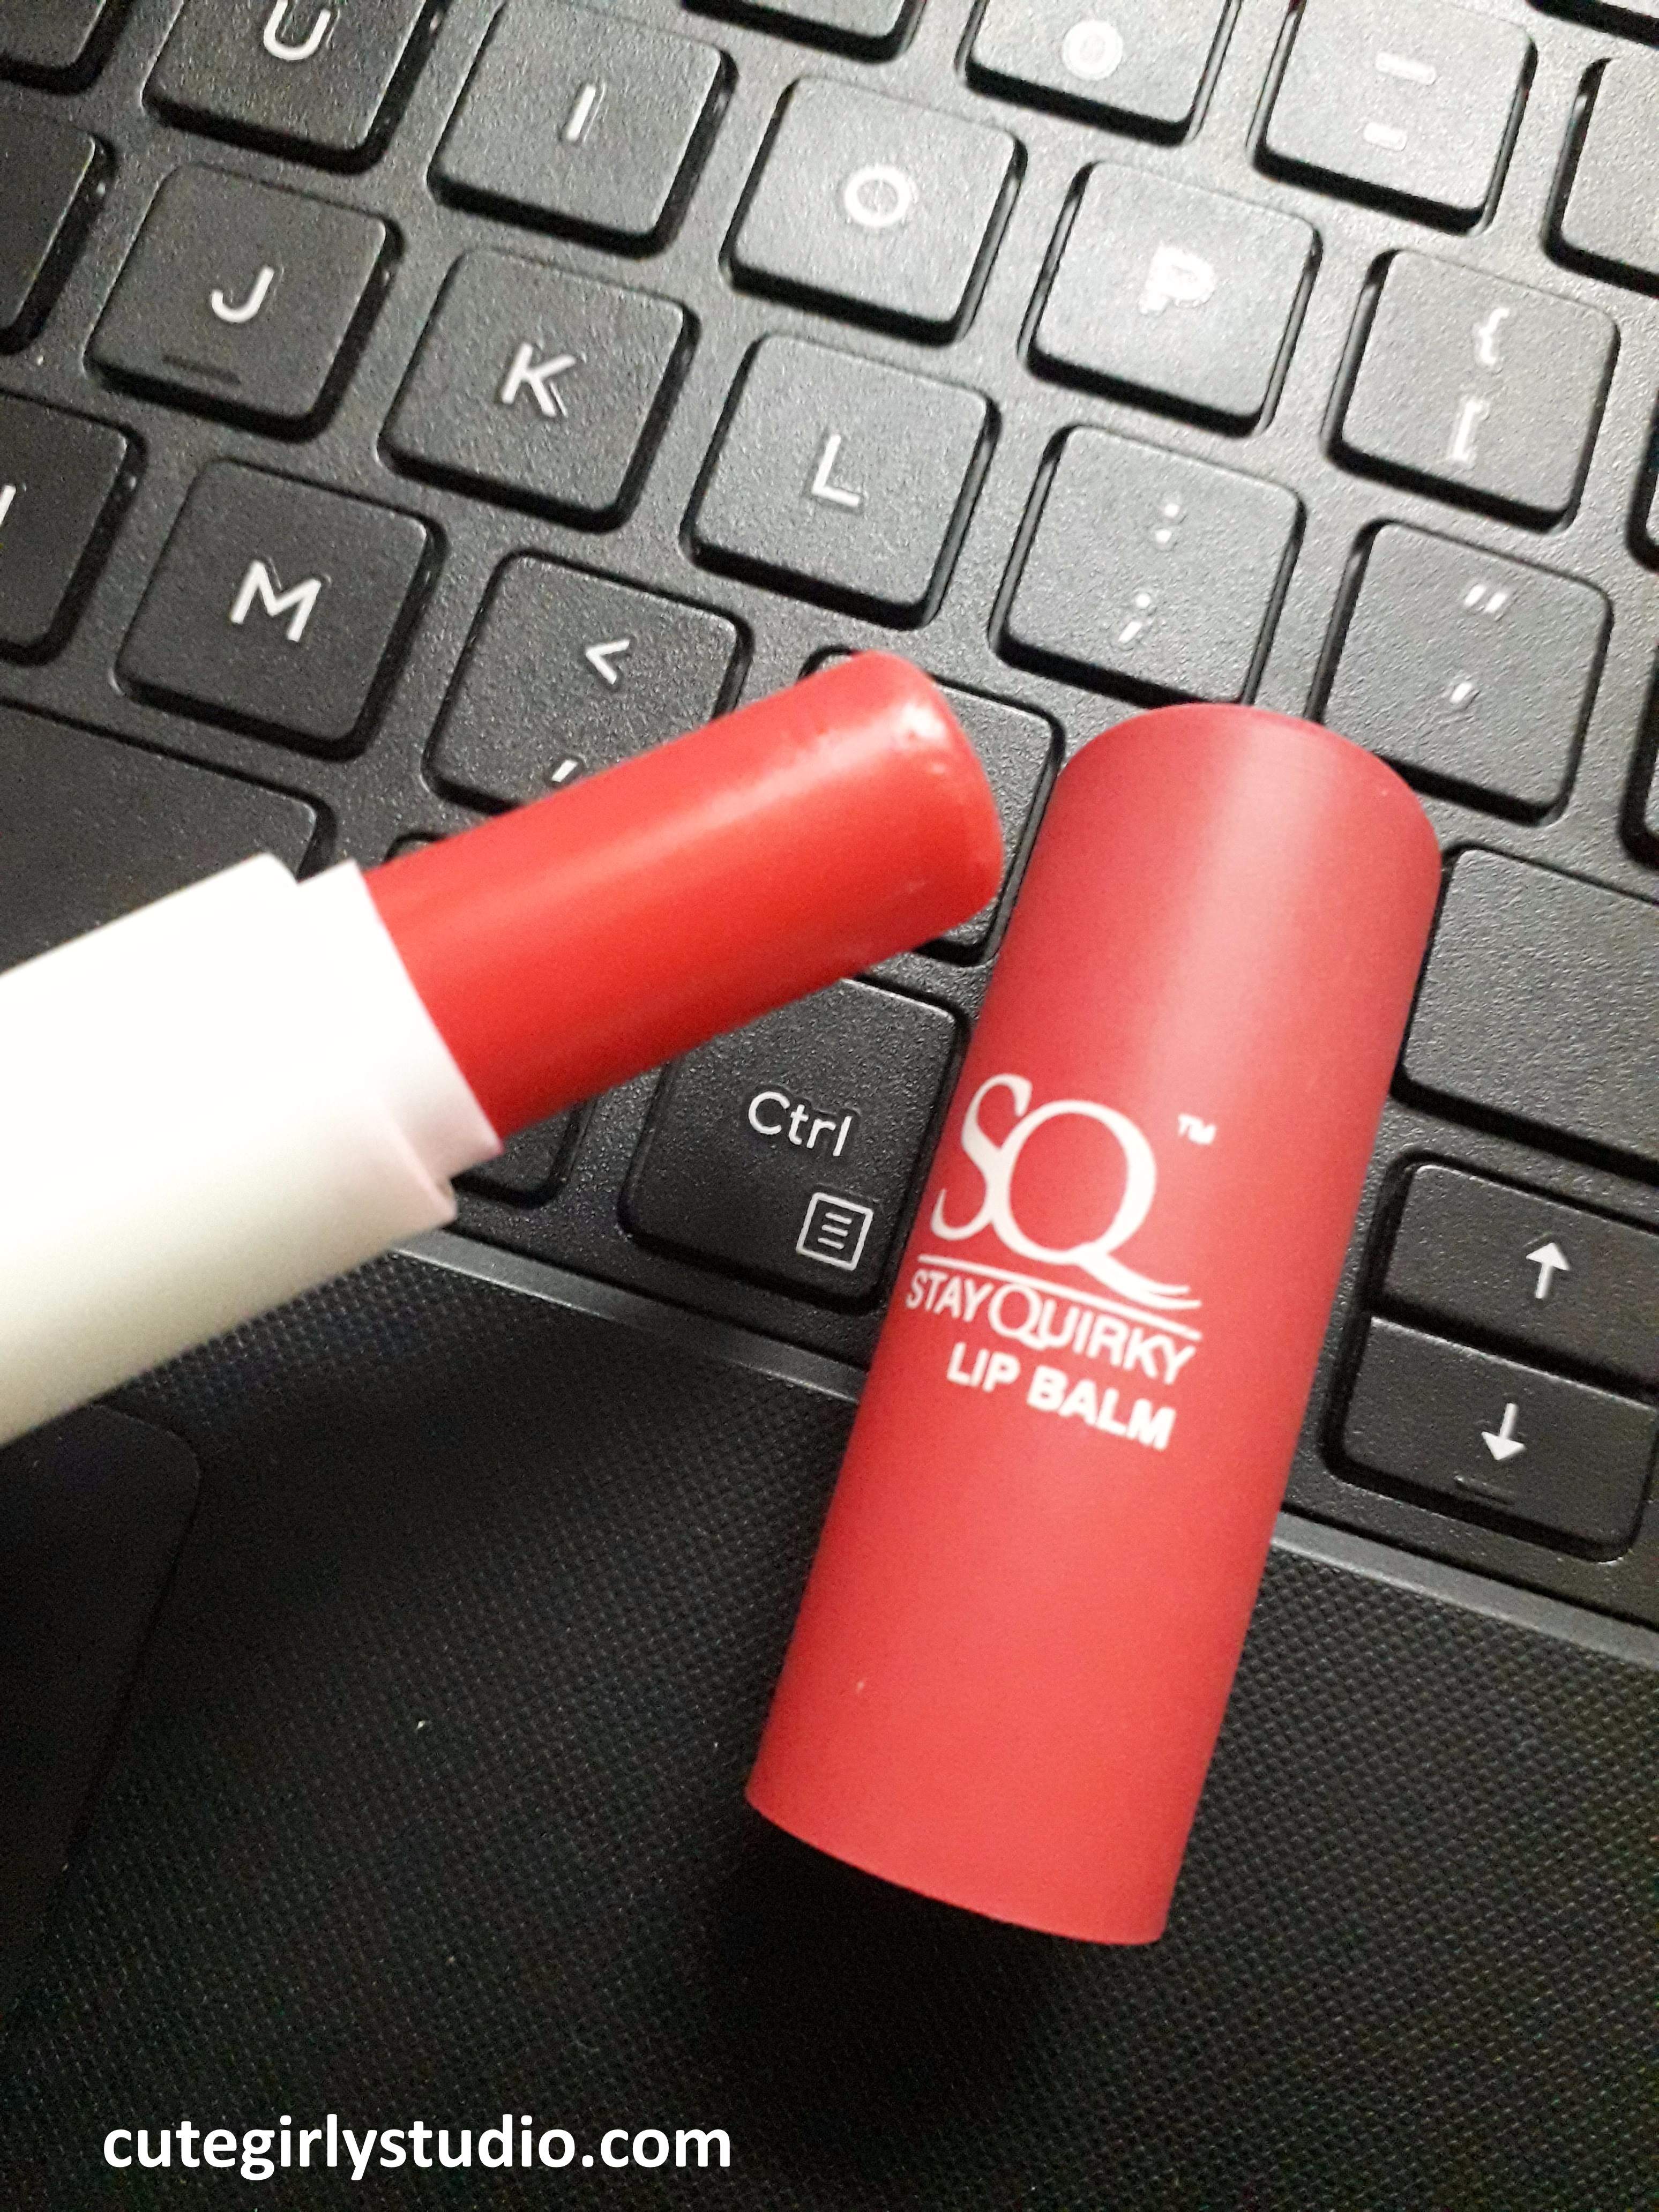 Stay Quirky lip balm review - I like it cherry much